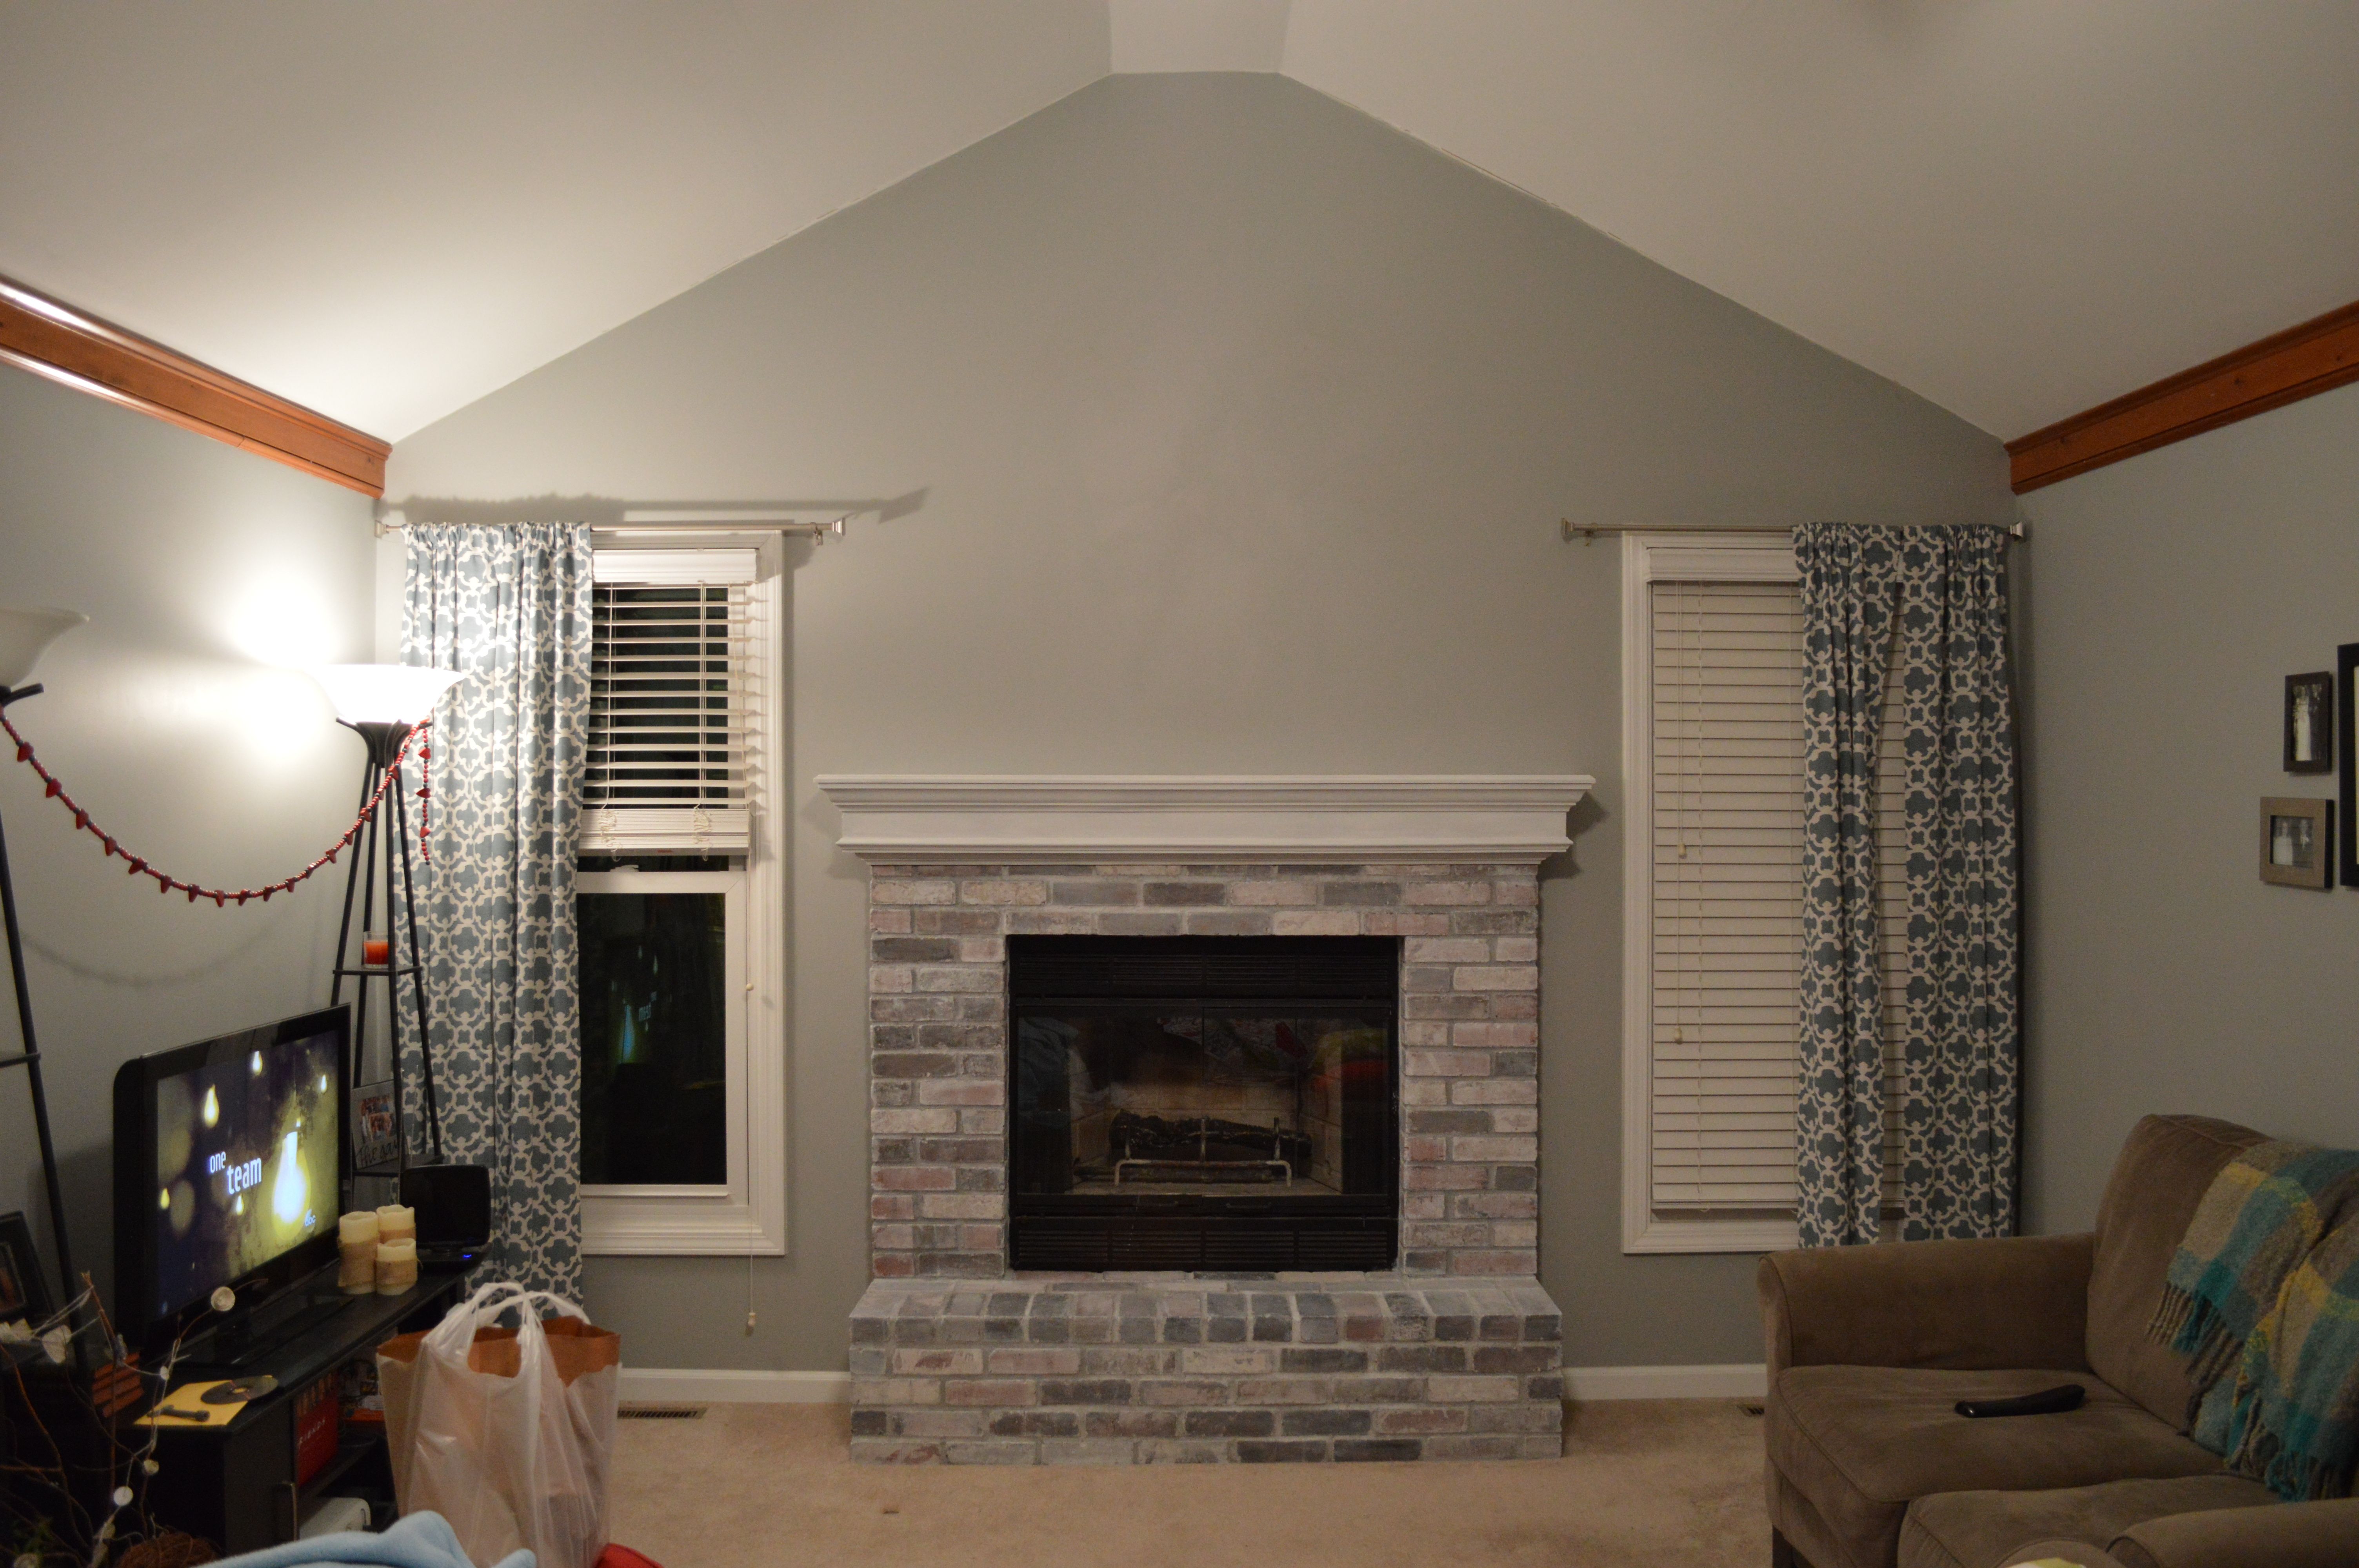 Brick Wall Fireplace Makeover Luxury How to Whitewash Brick Our Fireplace Makeover Loving